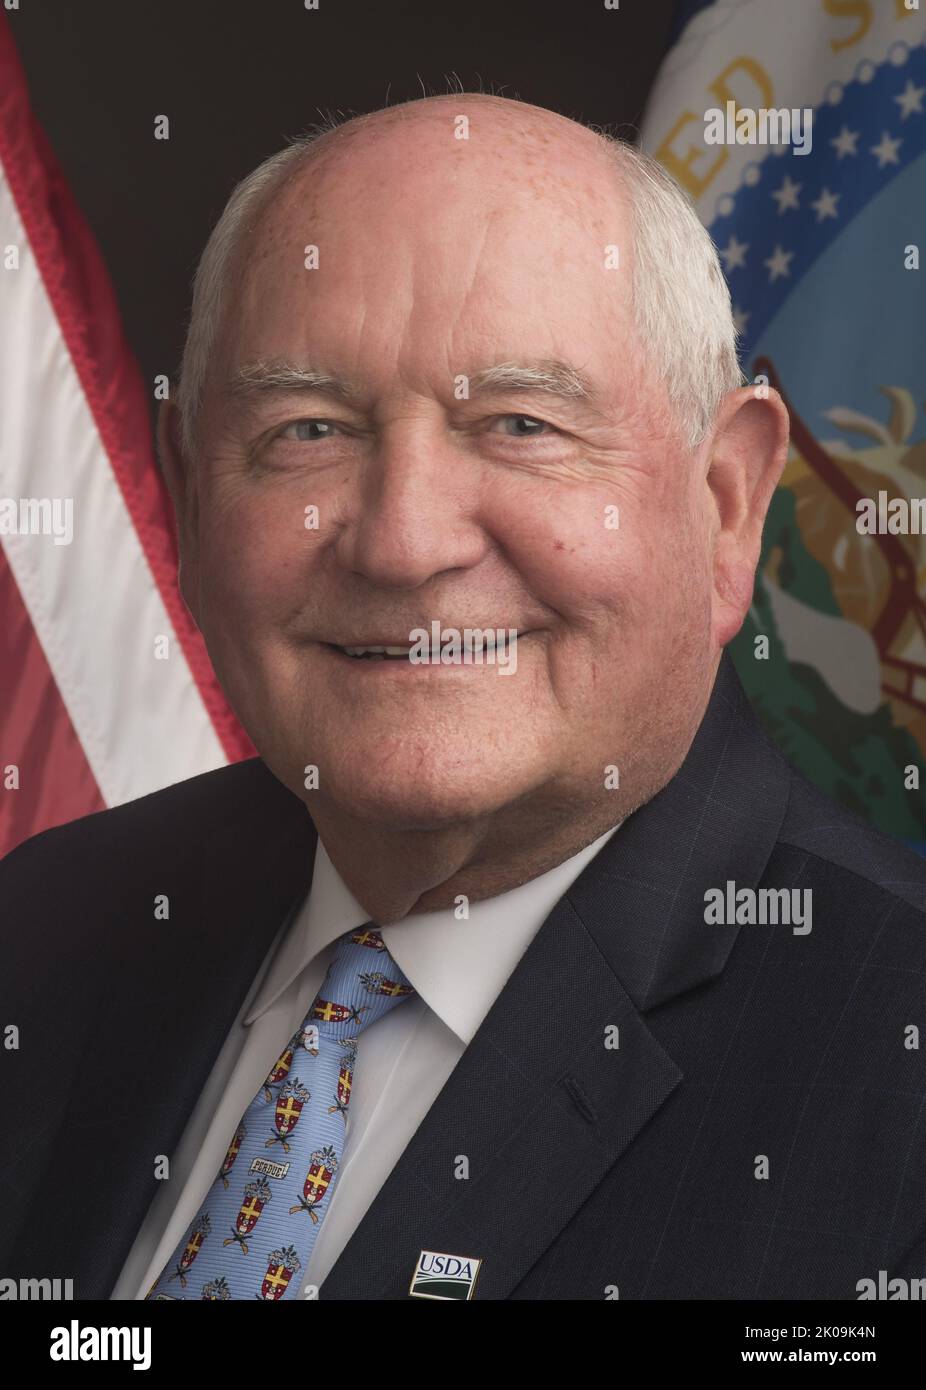 George Ervin 'Sonny' Perdue III (born December 20, 1946) is an American veterinarian, businessman, and politician who served as the 31st United States Secretary of Agriculture from 2017 to 2021. He previously served as Governor of Georgia from 2003 to 2011. Stock Photo